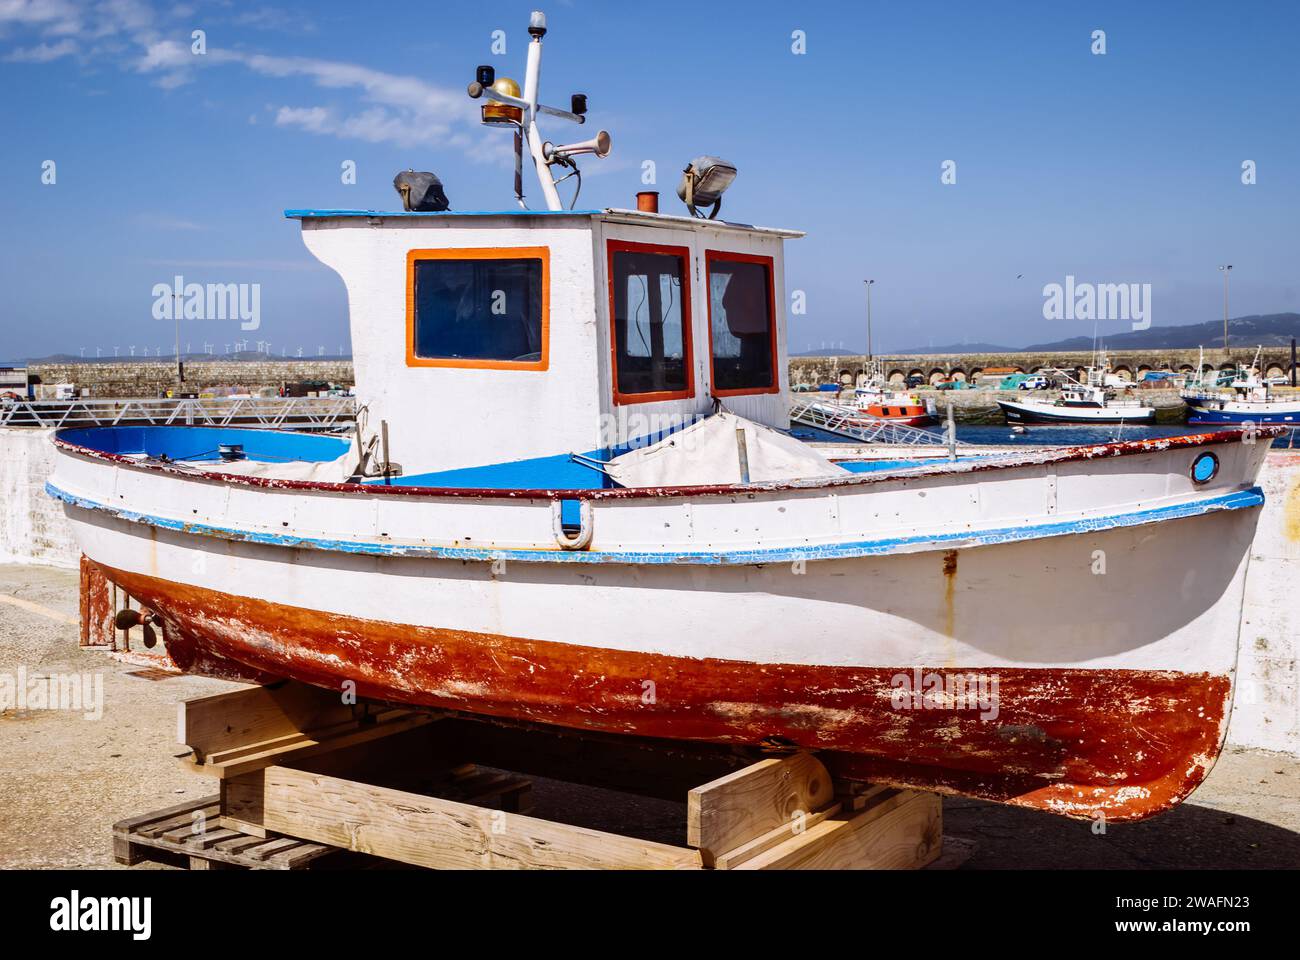 A small fishing boat on a wooden stand in a harbor Stock Photo